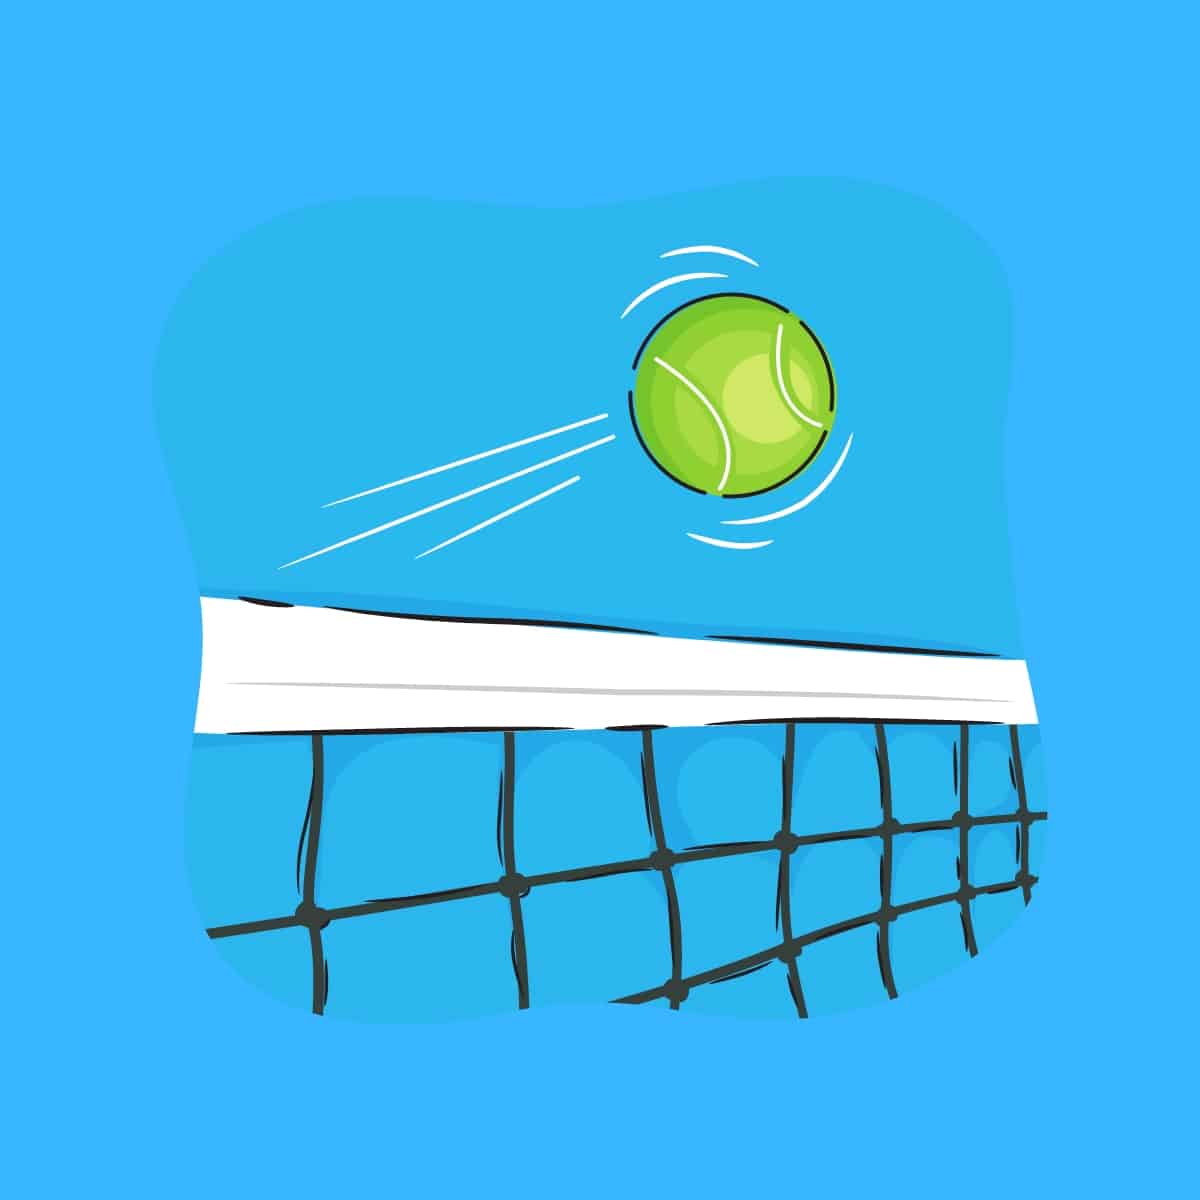 Cartoon graphic of a tennis ball flying over a tennis net on blue background.